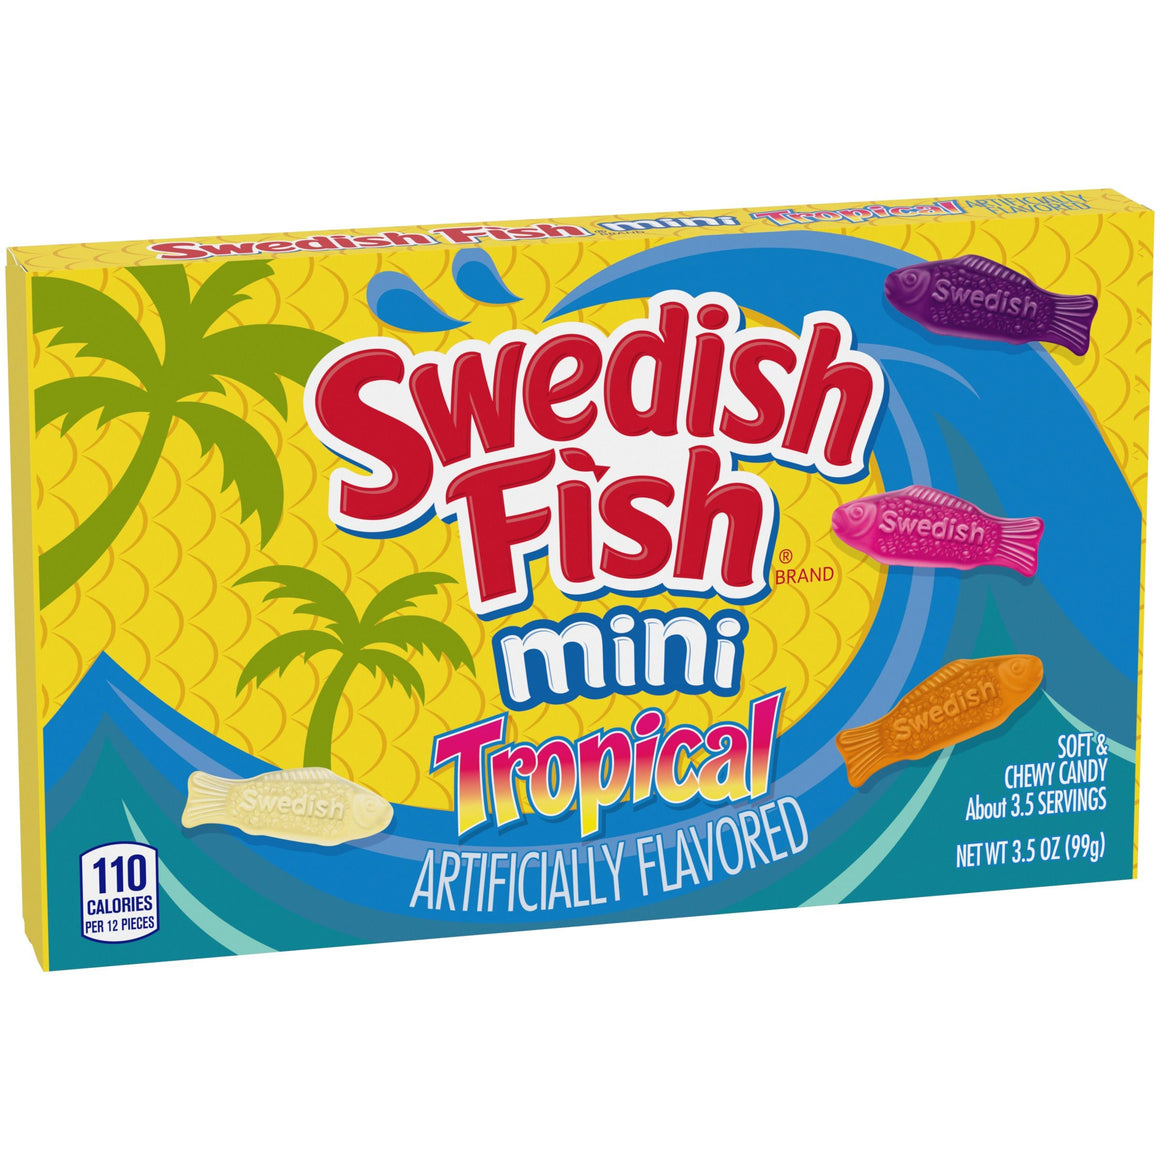 All City Candy Swedish Fish Mini Tropical Soft & Chewy Candy - 3.5-oz. Theater Box Theater Boxes Mondelez International For fresh candy and great service, visit www.allcitycandy.com